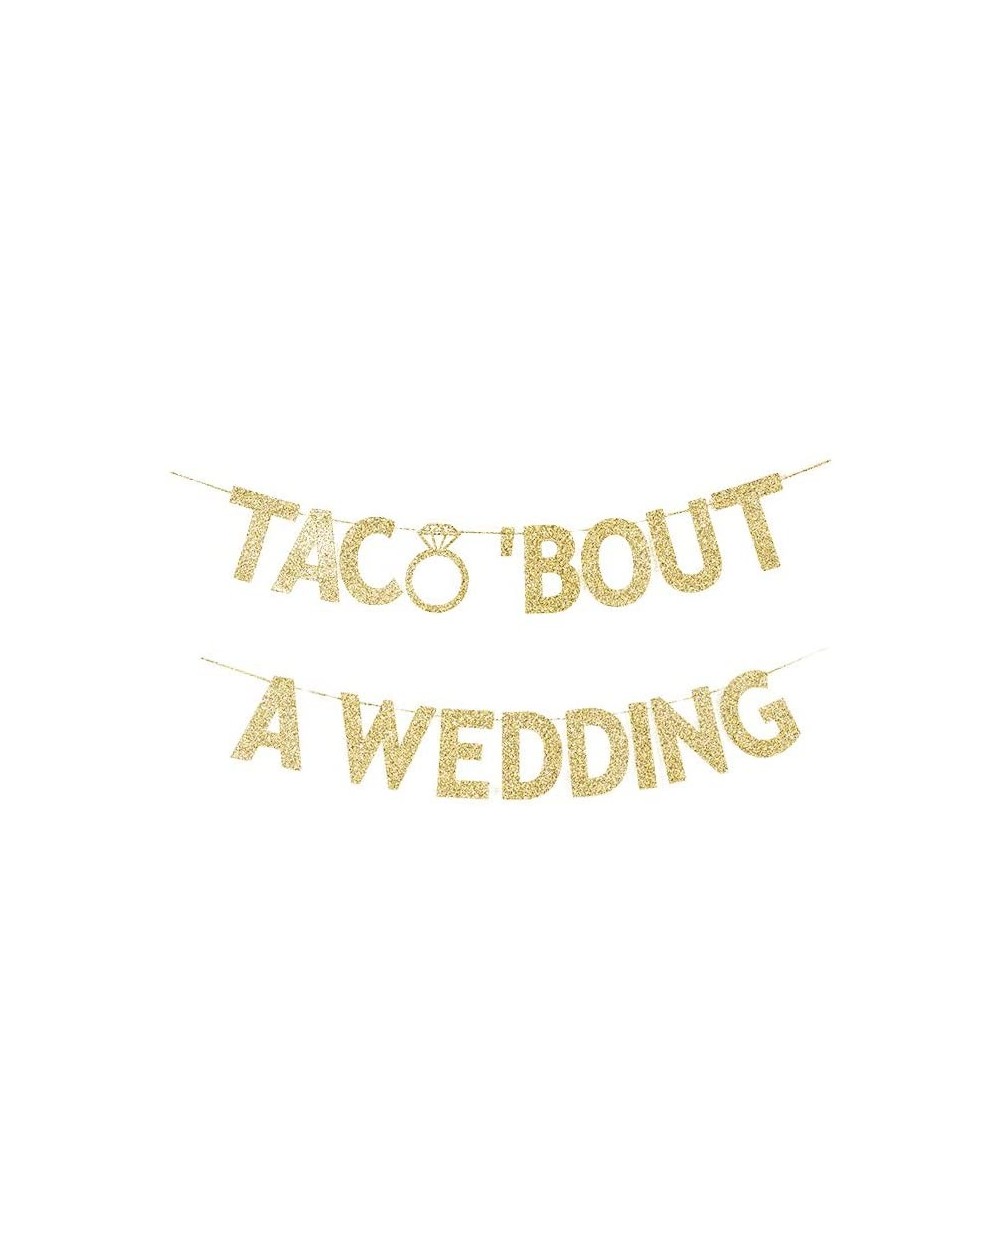 Banners & Garlands Taco' Bout A Wedding Banner- Mexician Themed Wedding Party Sign Decors Gold Gliter Paper Backdrops - C9194...